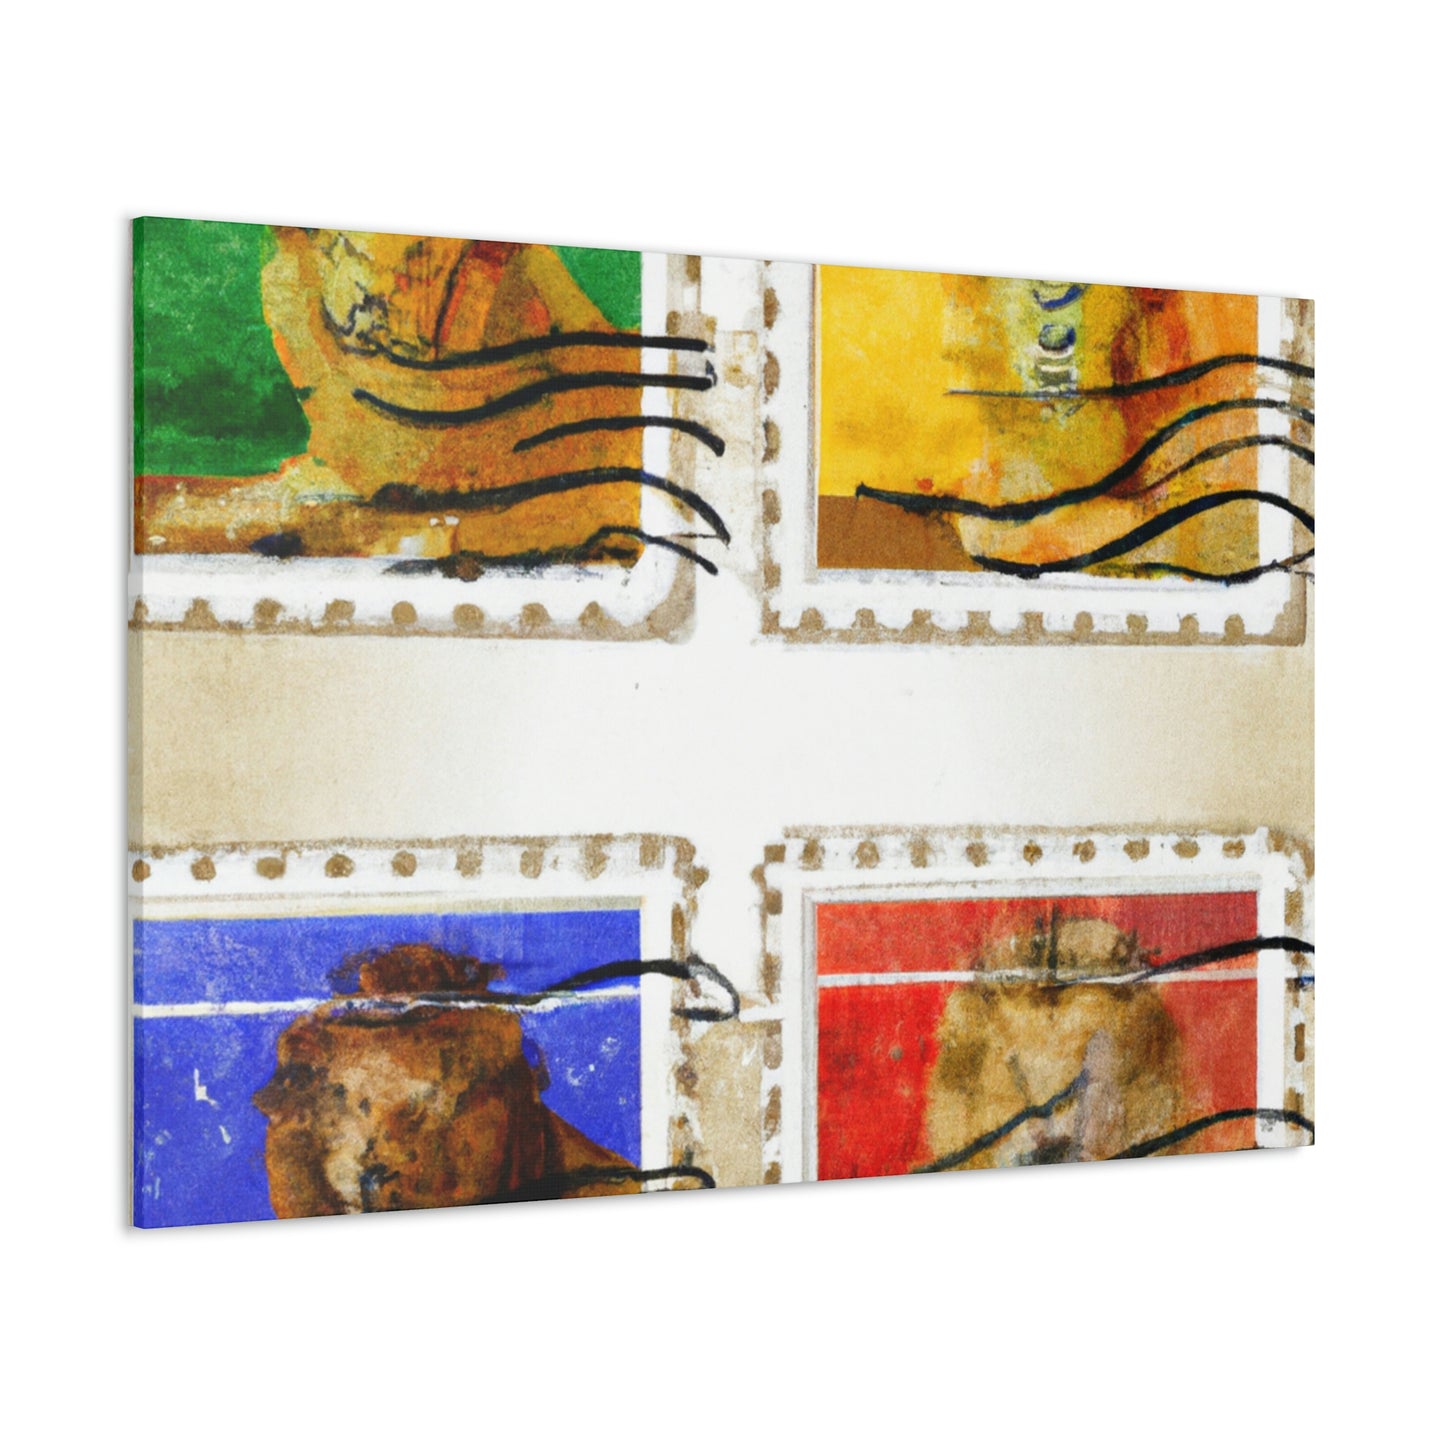 GlobalGems - Postage Stamp Collector Canvas Wall Art